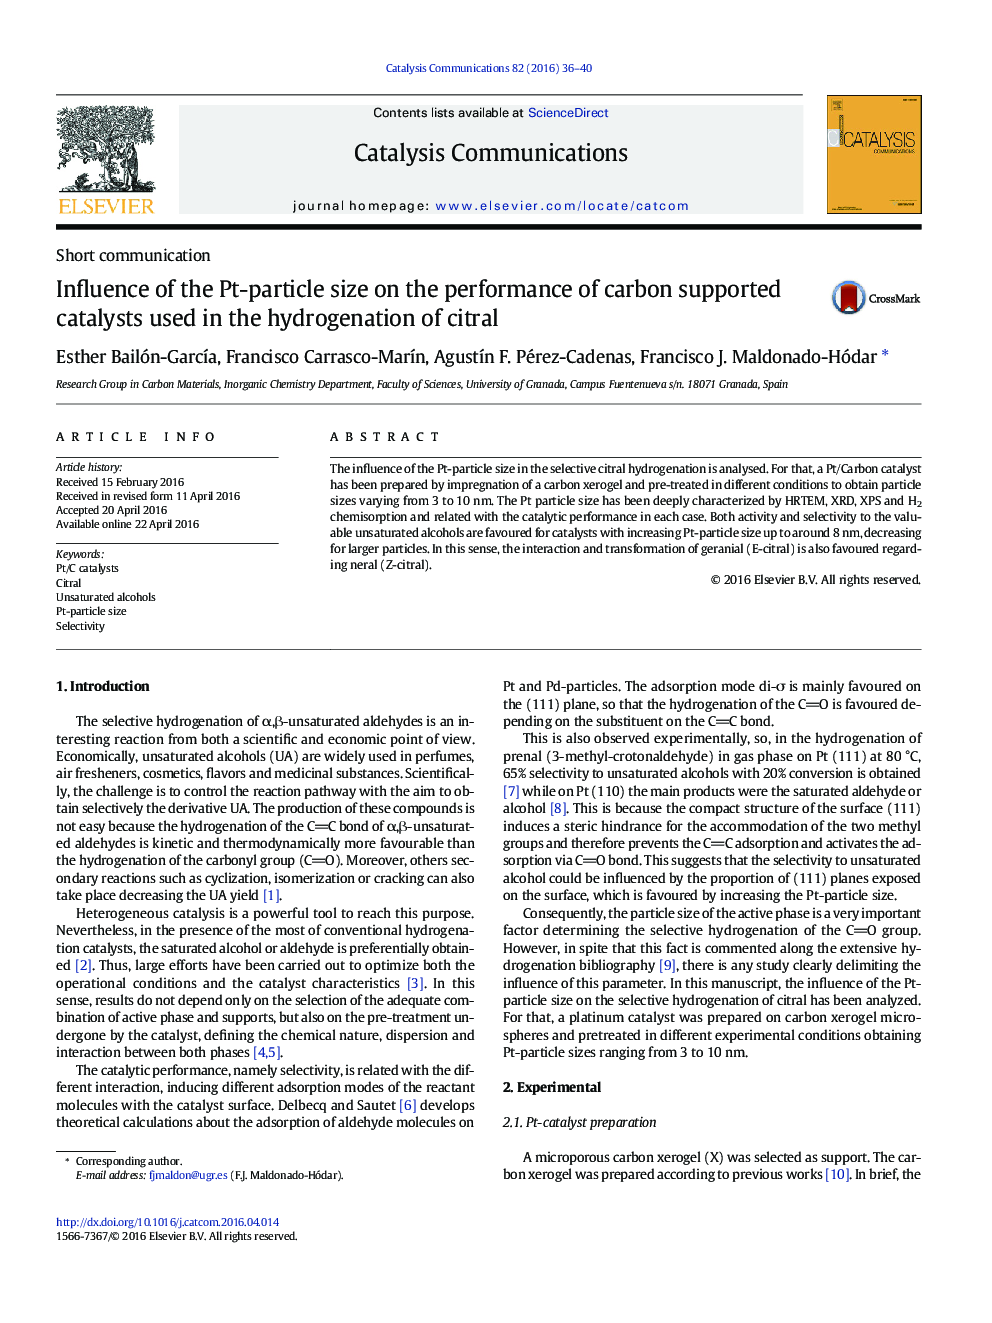 Influence of the Pt-particle size on the performance of carbon supported catalysts used in the hydrogenation of citral